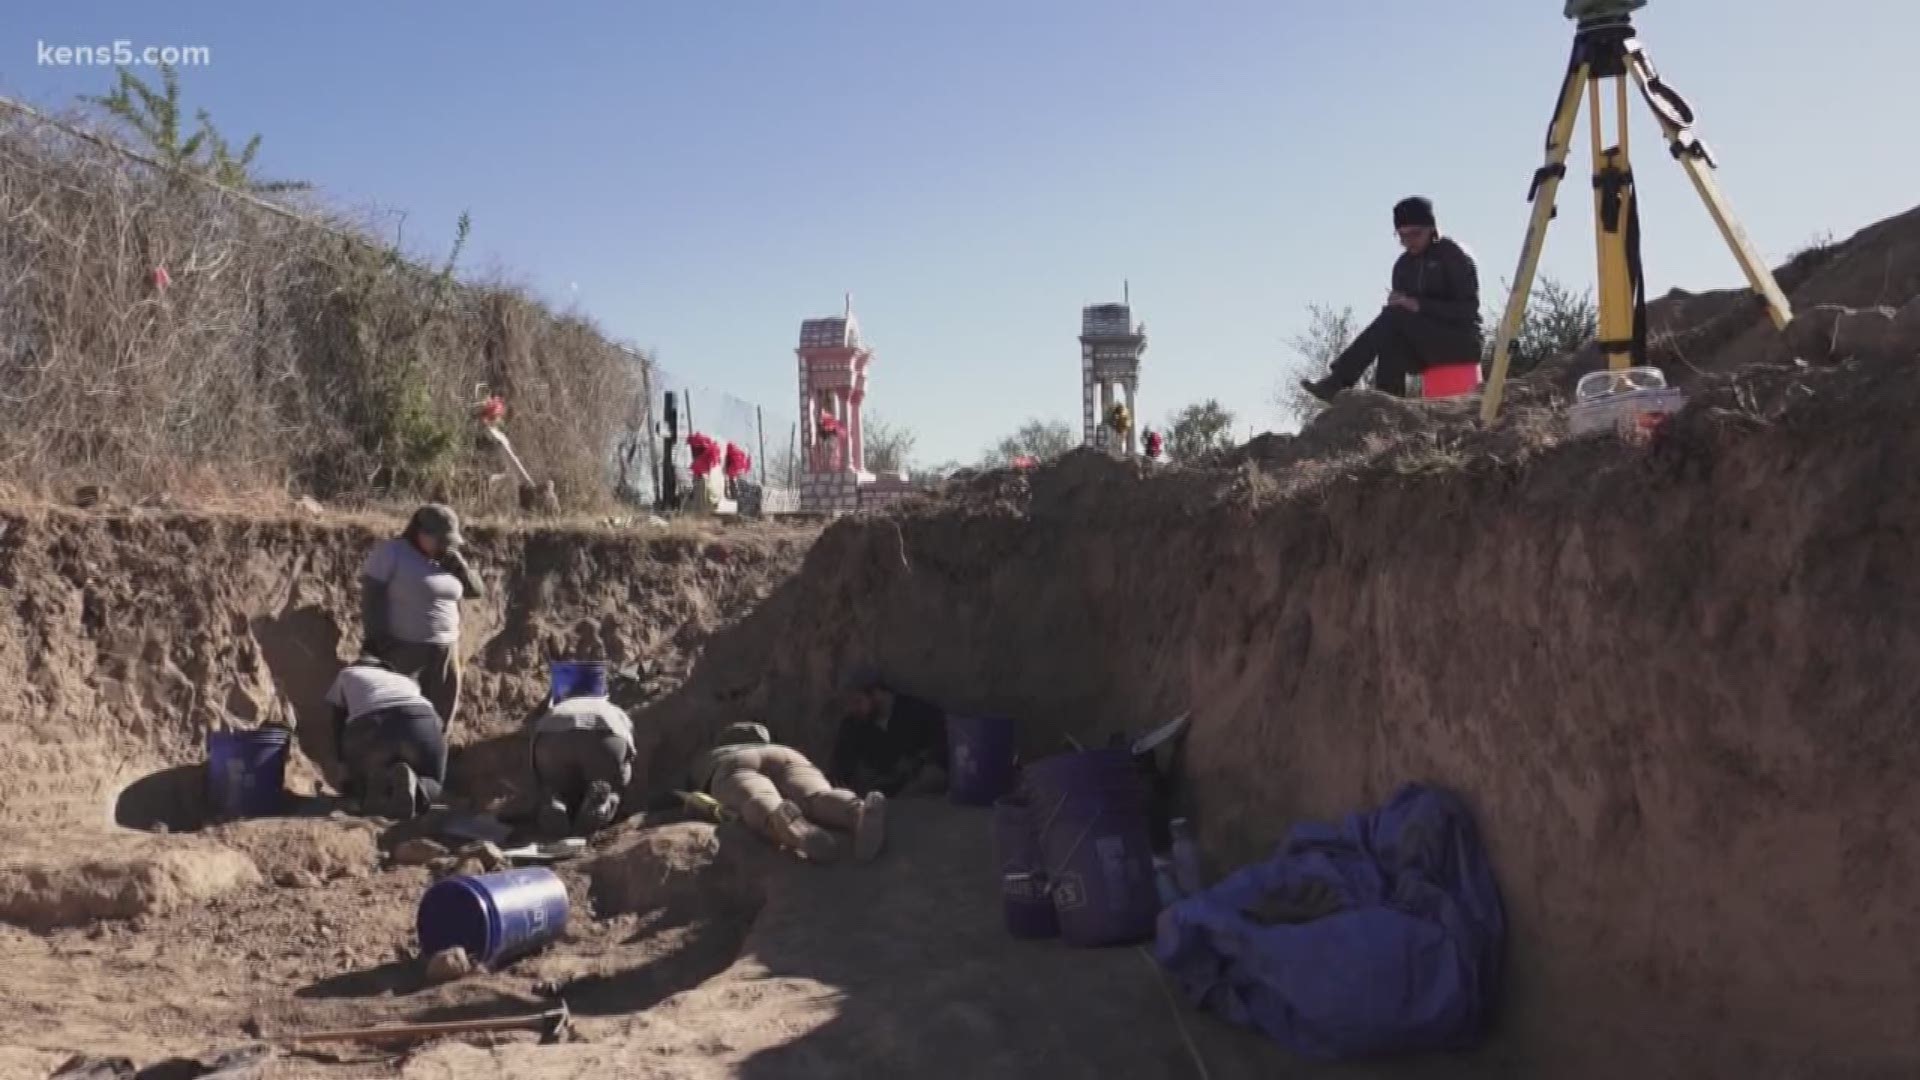 A forensic anthropology team from Texas State University is working to exhume six people who are believed to be unidentified migrants at the border.